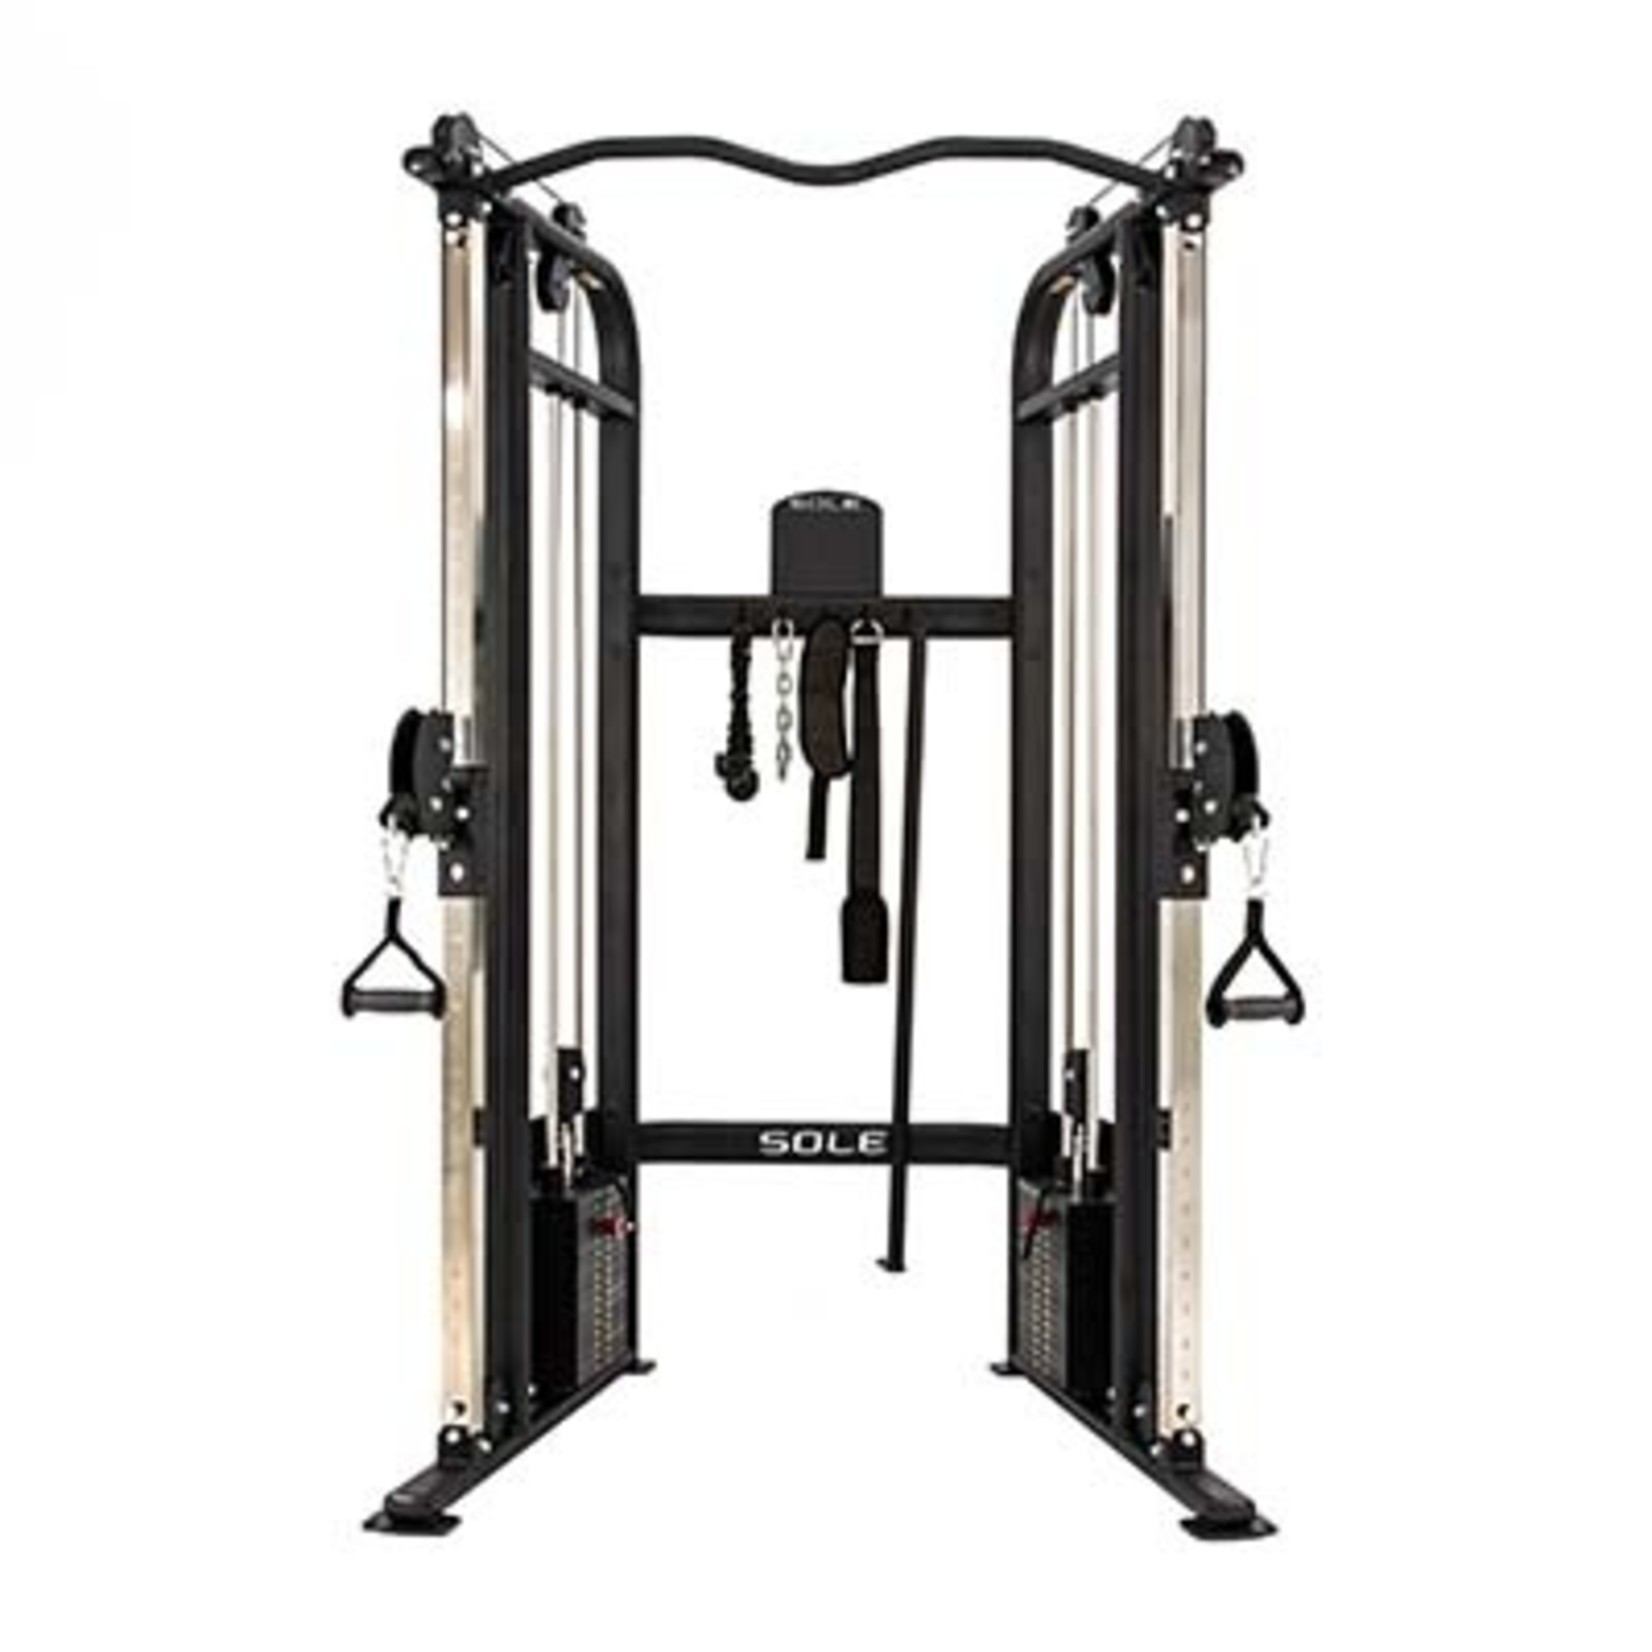 Sole Sole SFT160 Functional Trainer